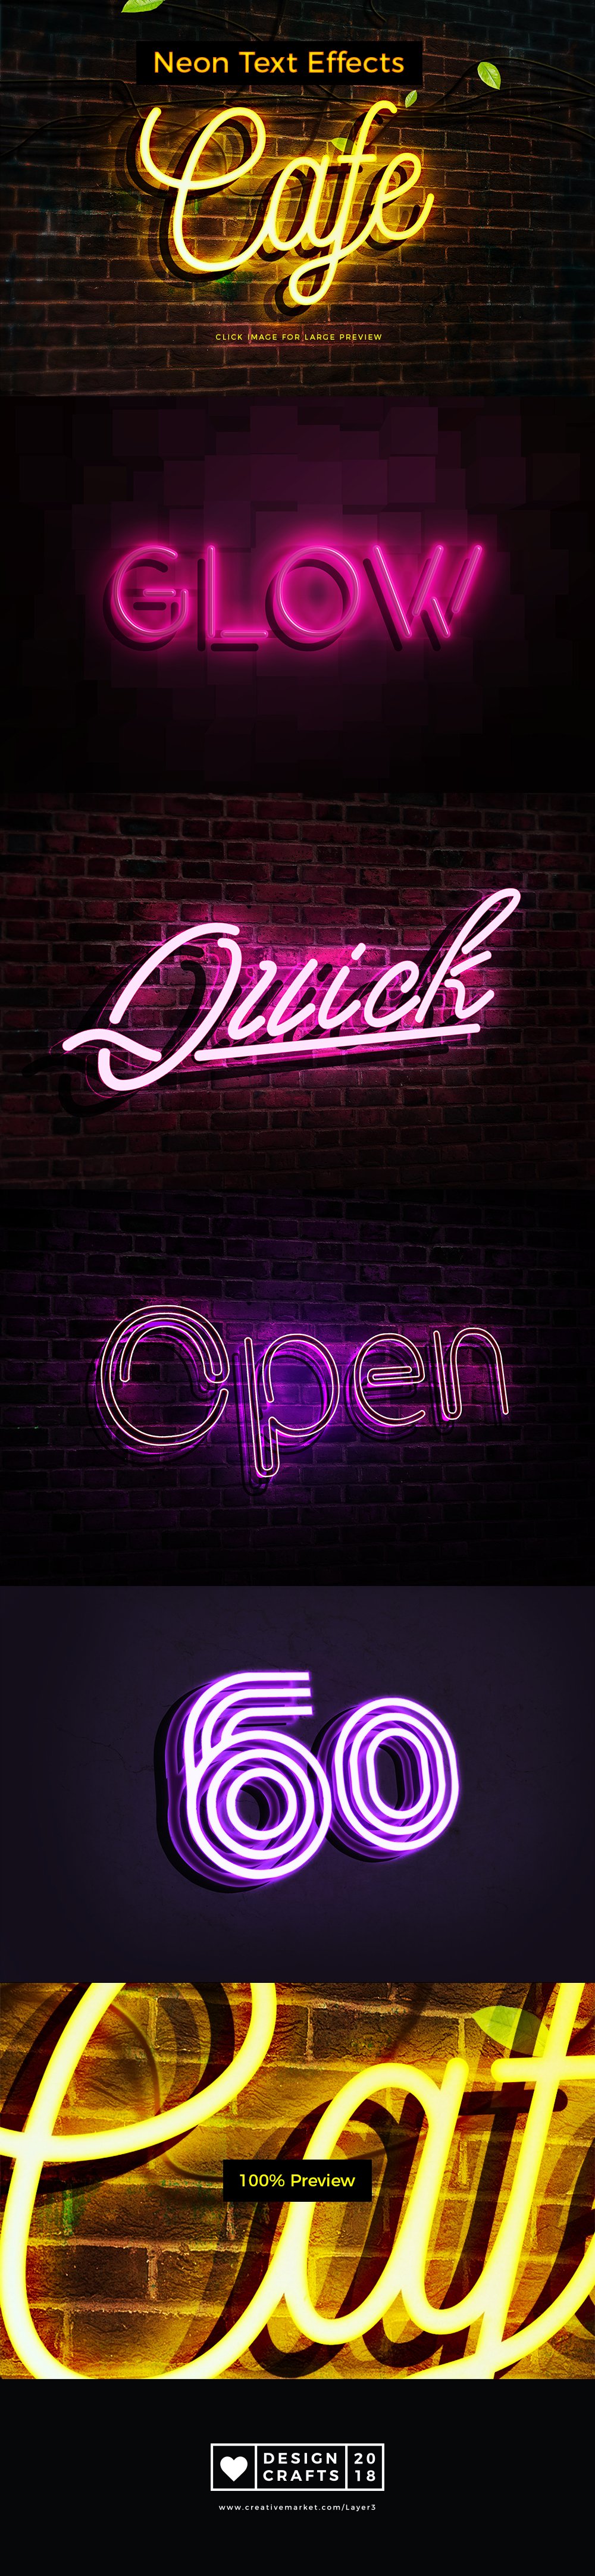 Neon Text Effectscover image.